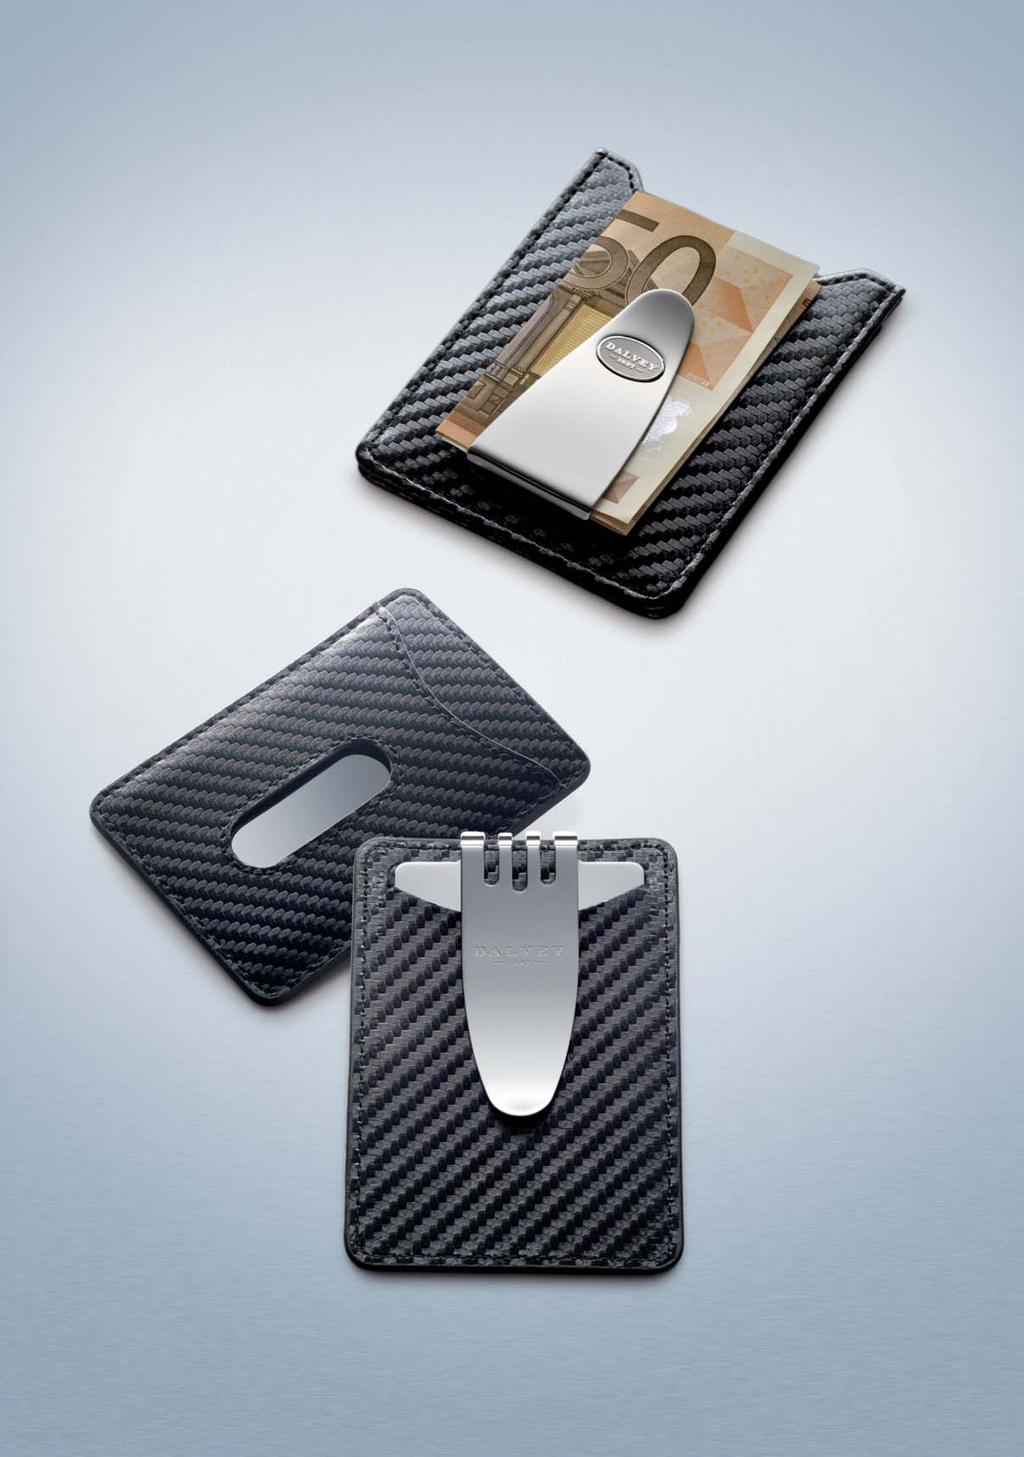 CREDIT CARD CASE & MONEY CLIP / CARBON FIBRE The classic Dalvey combination wallets or CMCs accommodate 10 credit cards, while their engraveable stainless steel clips securely hold notes and receipts.